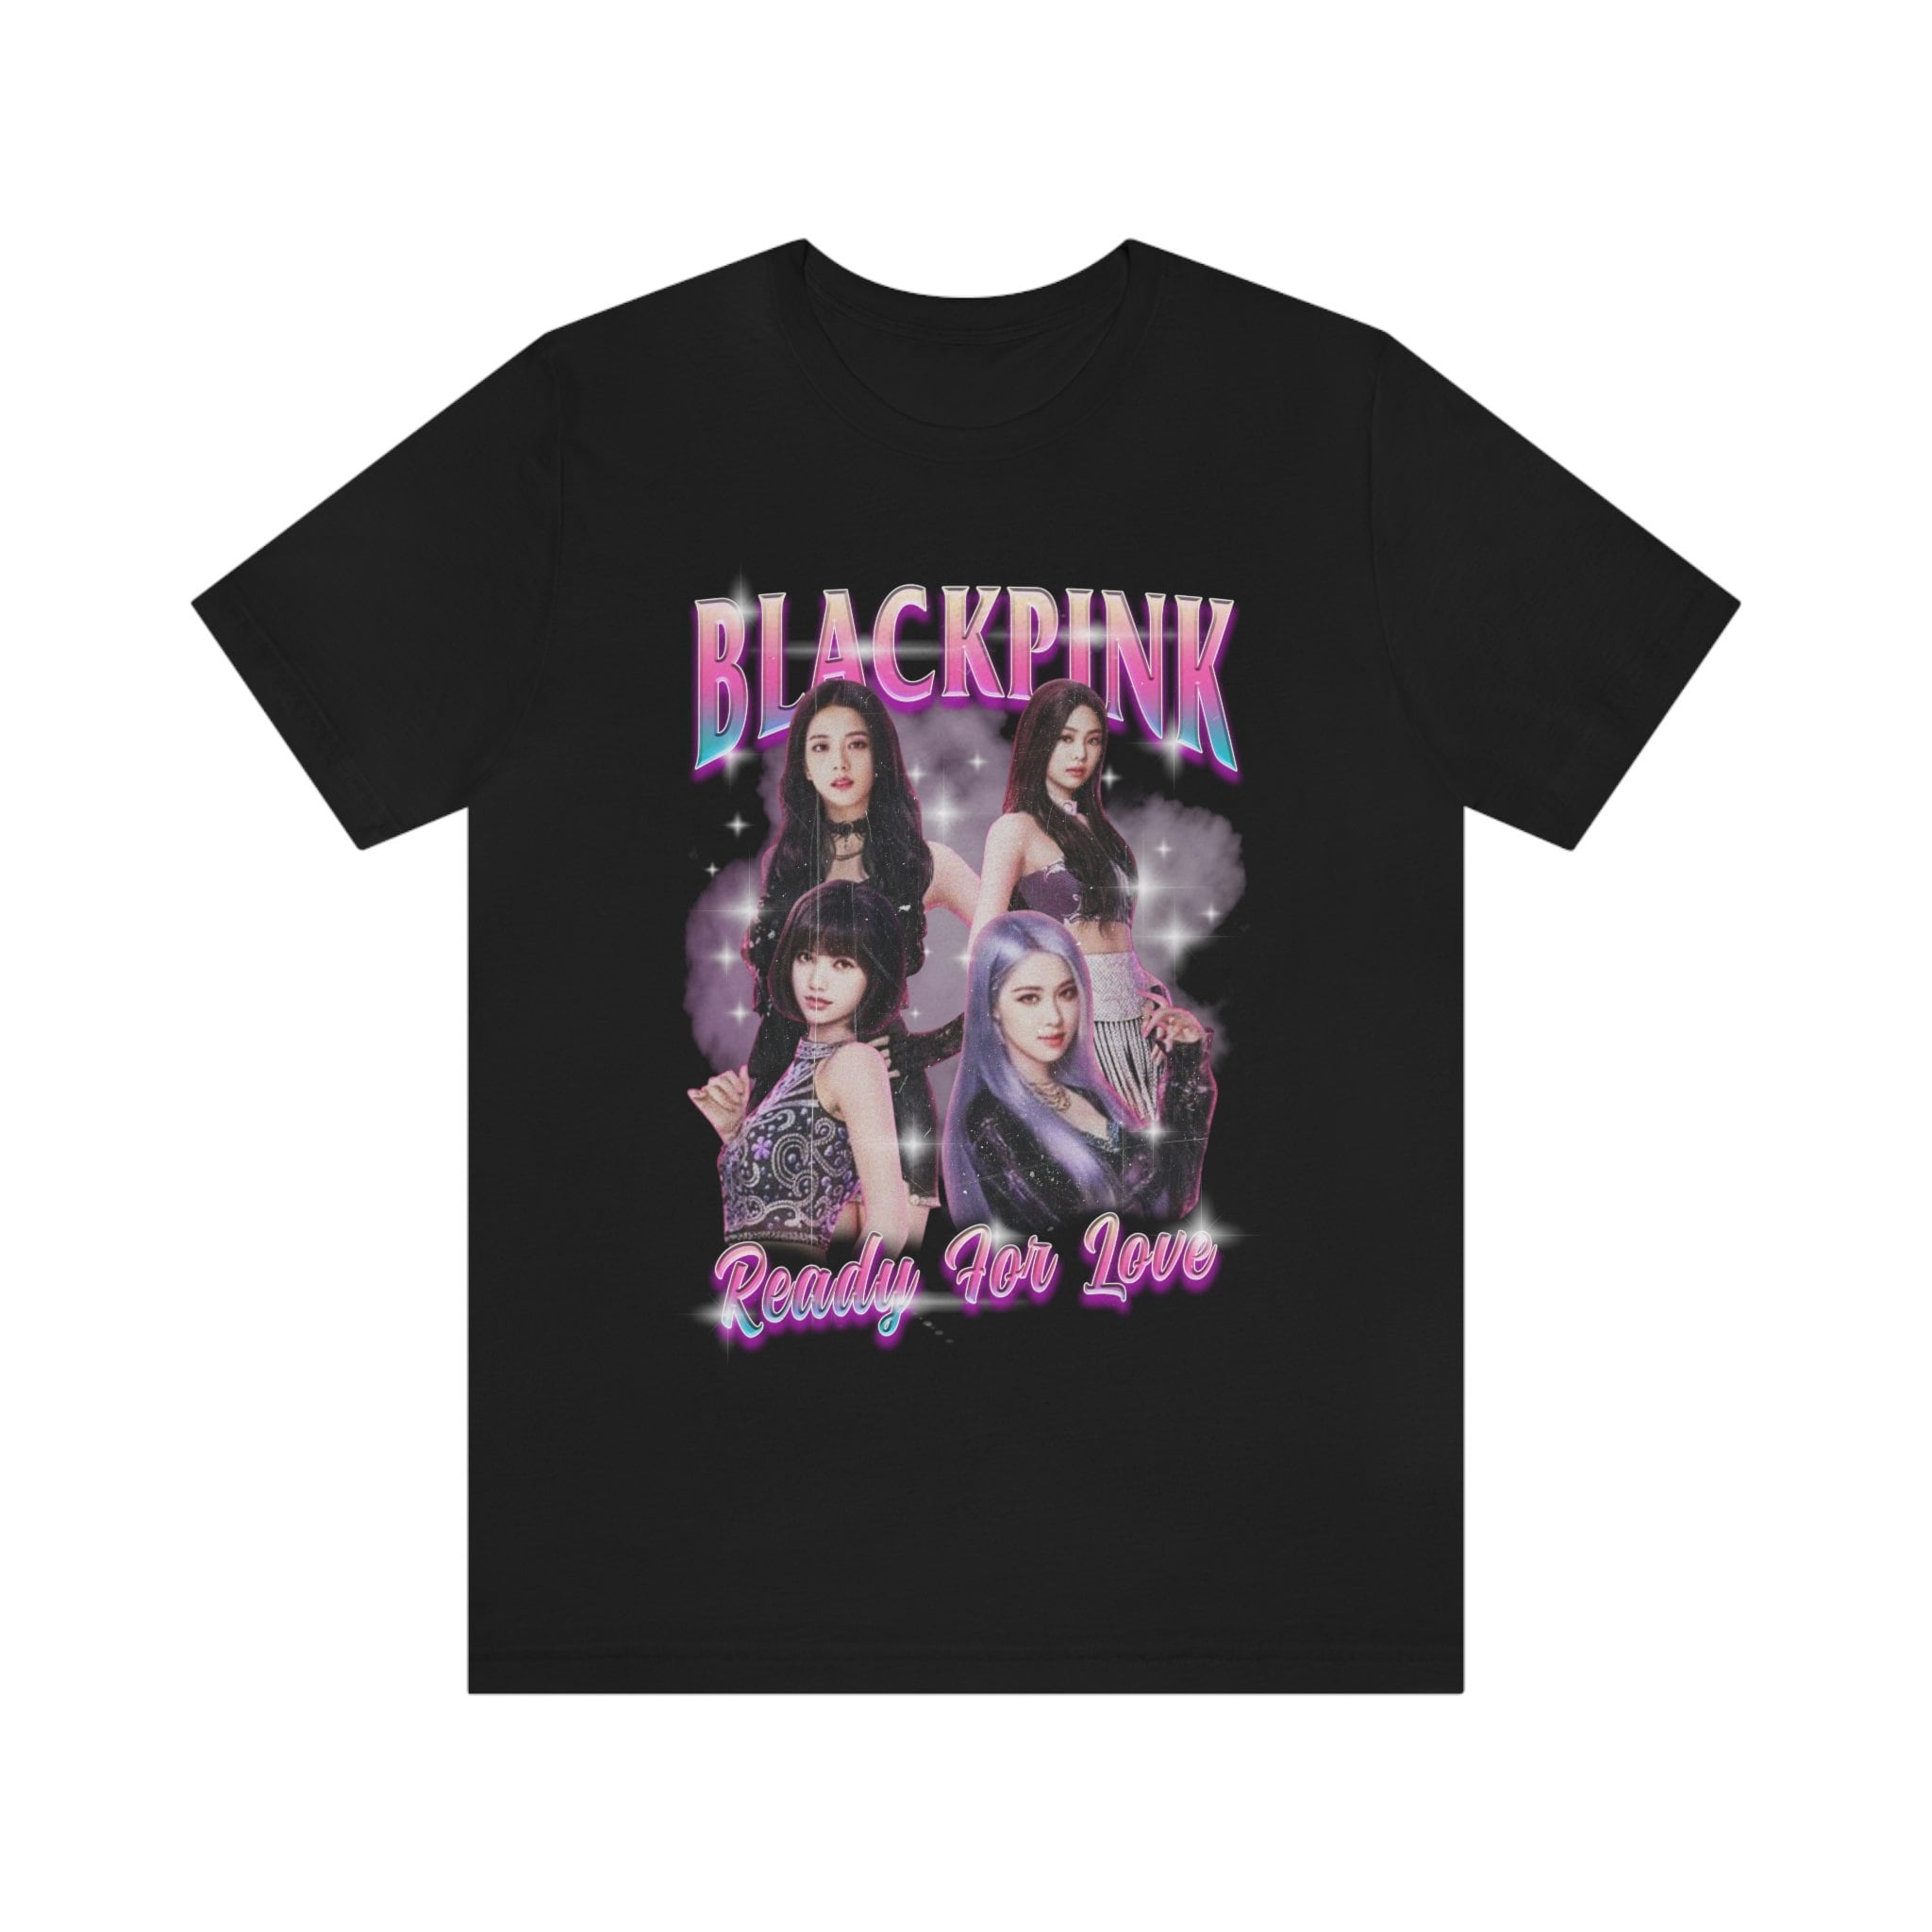 Discover Blackpink メンズ レディース Tシャツ Jennie Lisa Jisoo Rose ブラックピンク Blackpink In Your Area Blink Kpop